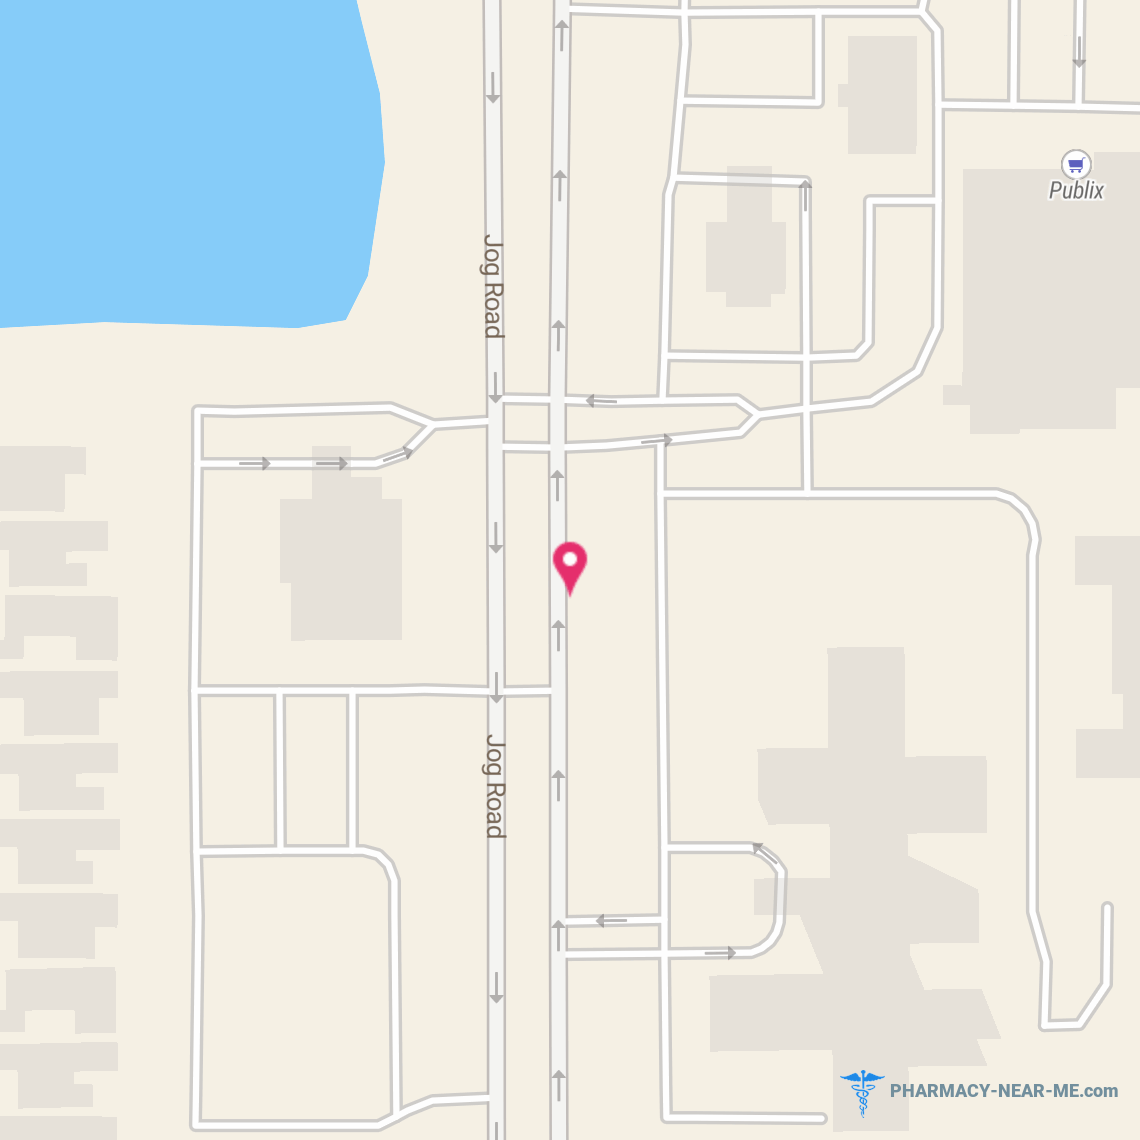 PUBLIX PHARMACY #1018 - Pharmacy Hours, Phone, Reviews & Information: 16130 S Jog Rd, Delray Beach, Florida 33484, United States